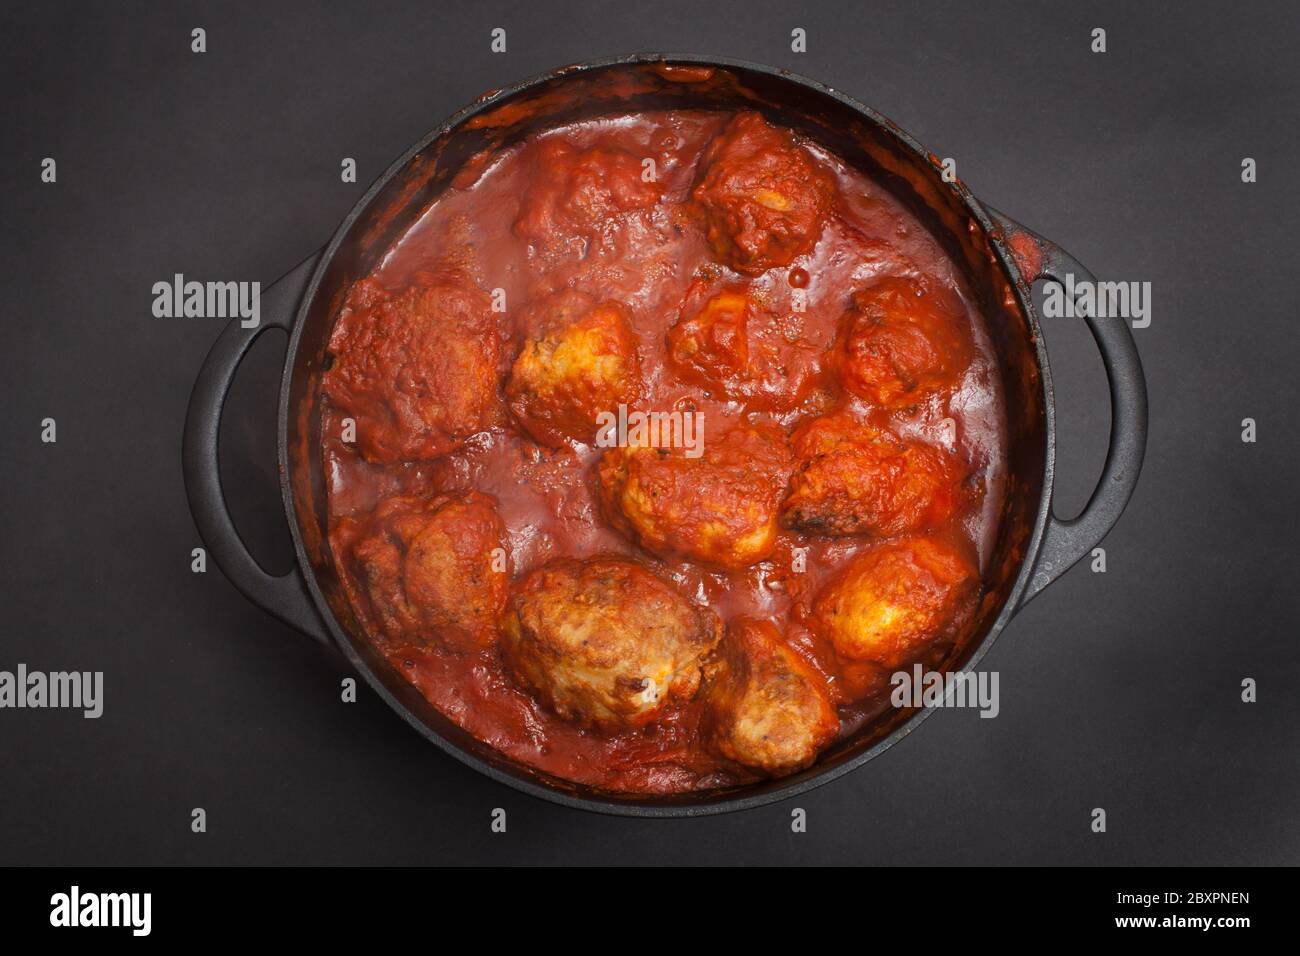 A Libyan dish called Mafrum, potatoes stuffed with mince beef and cooked in a tomato sauce Stock Photo